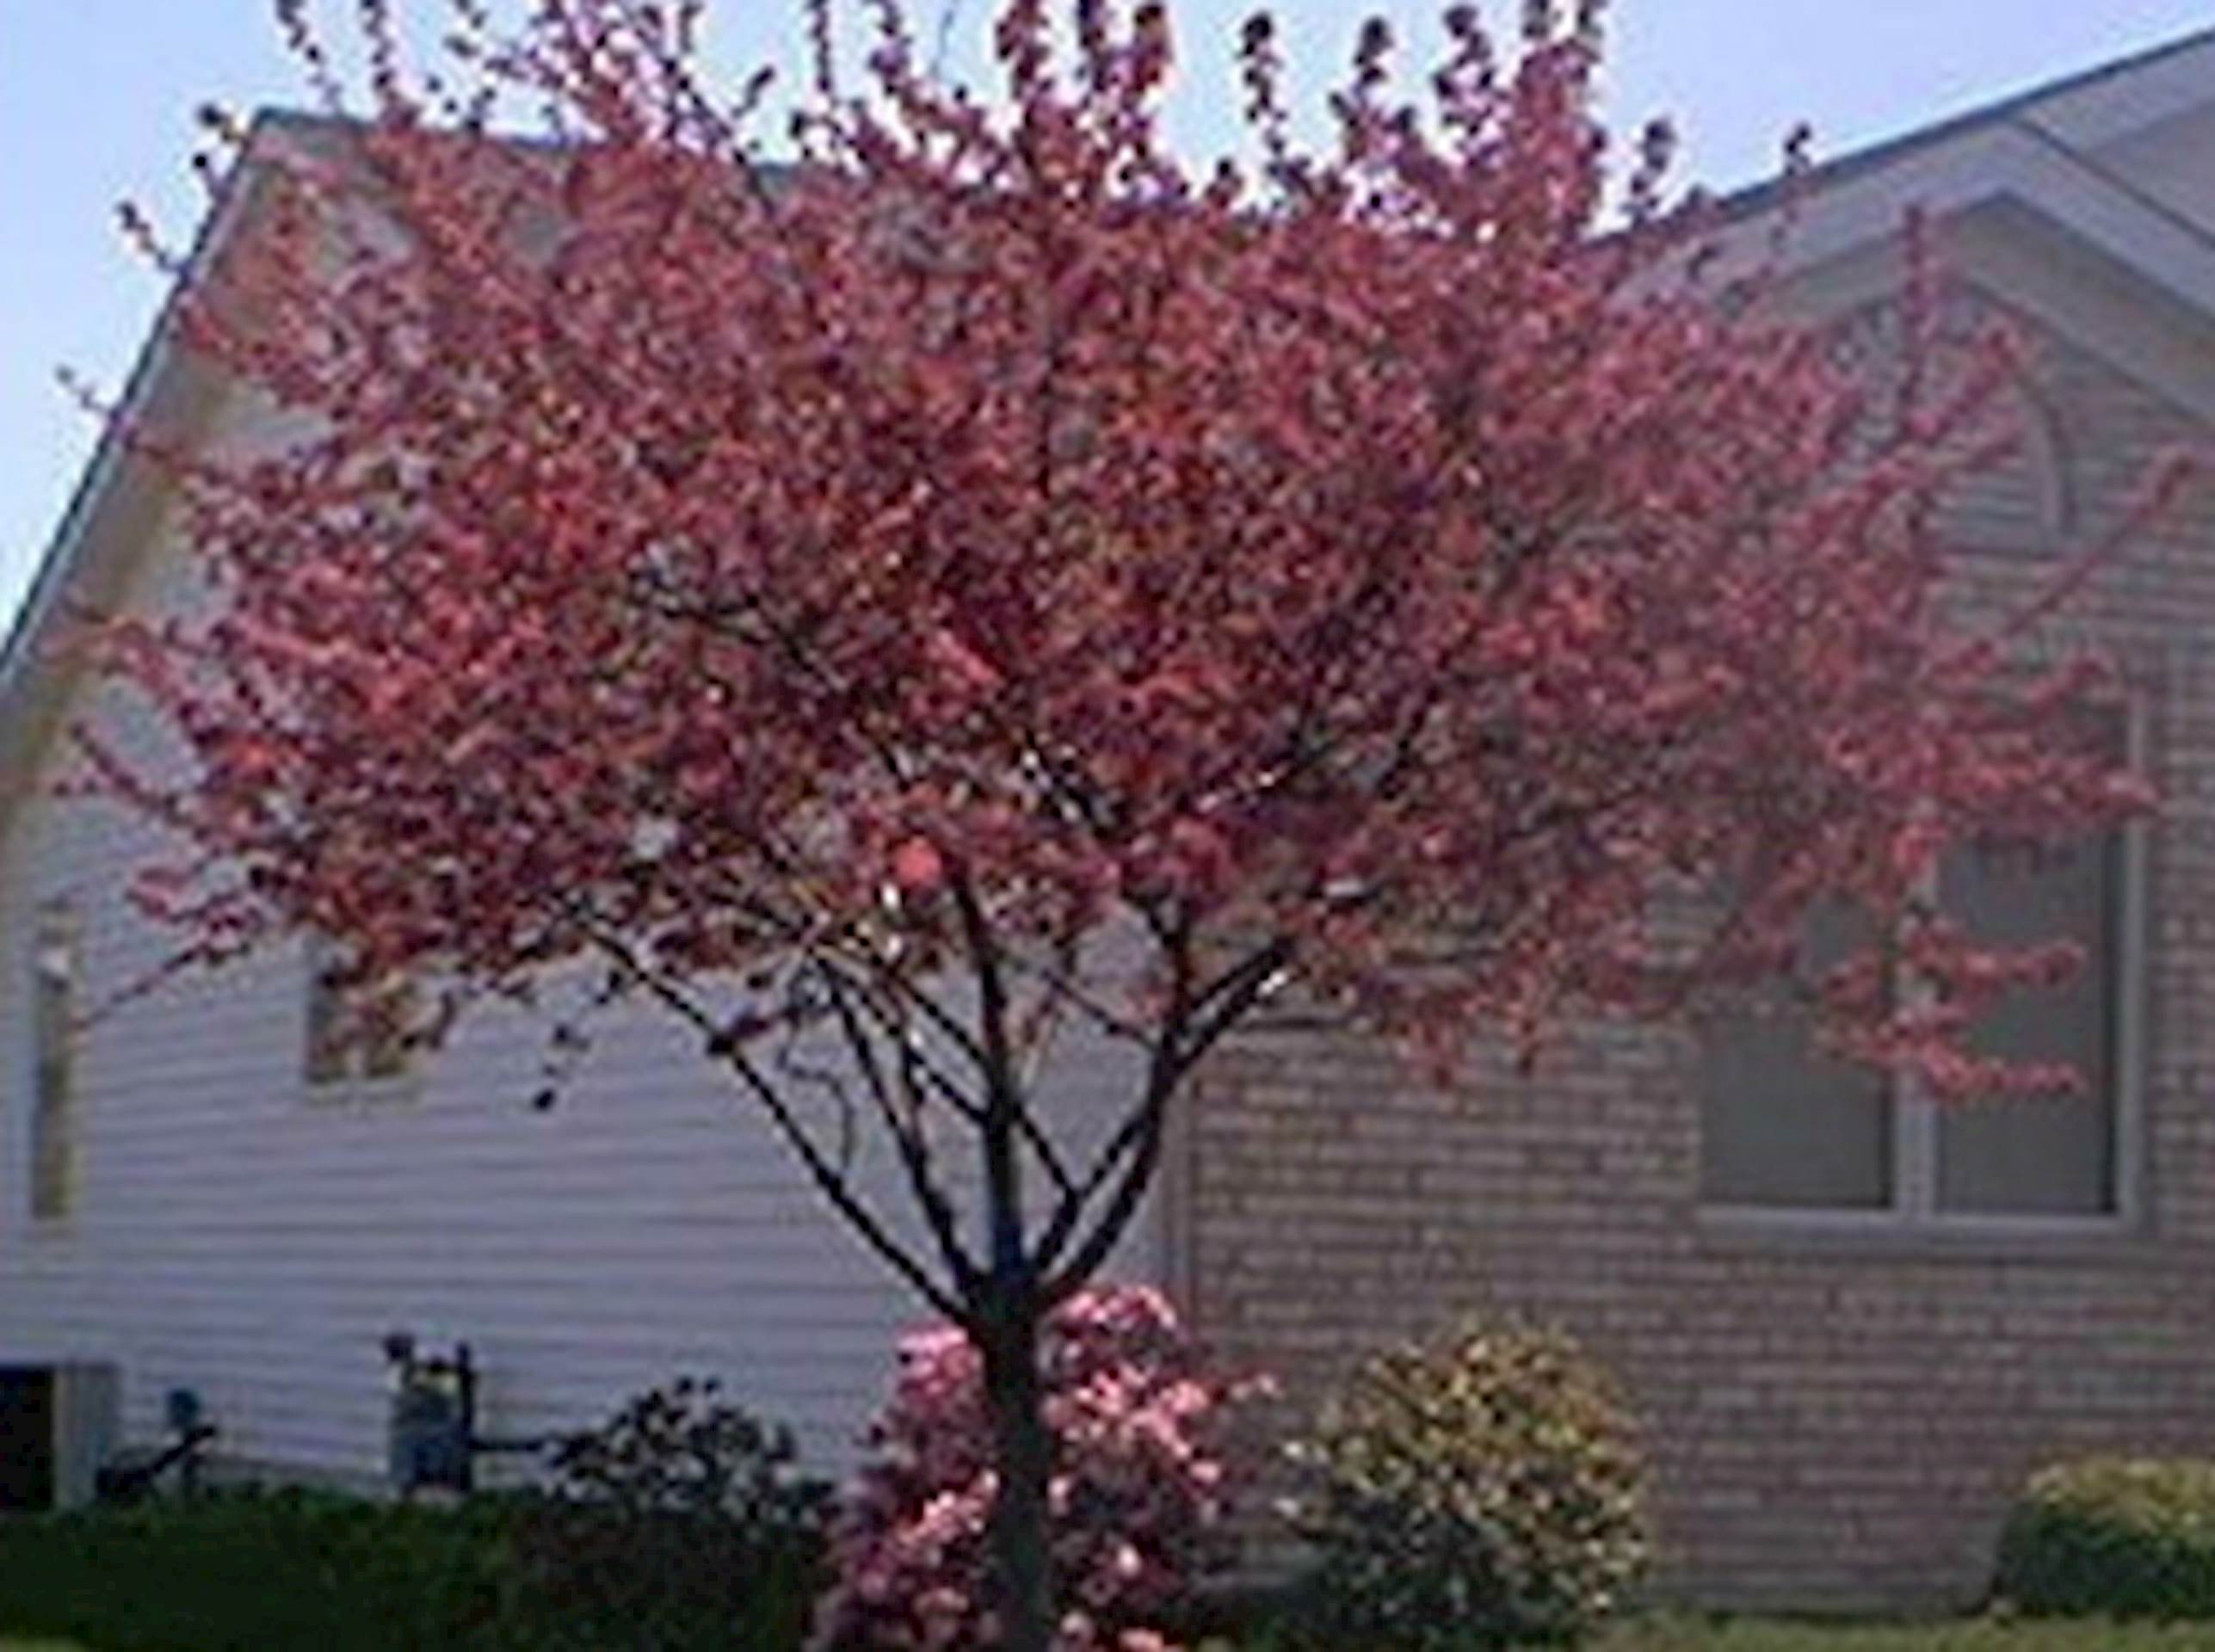 A photo of a flowering crab tree blossoming in the spring